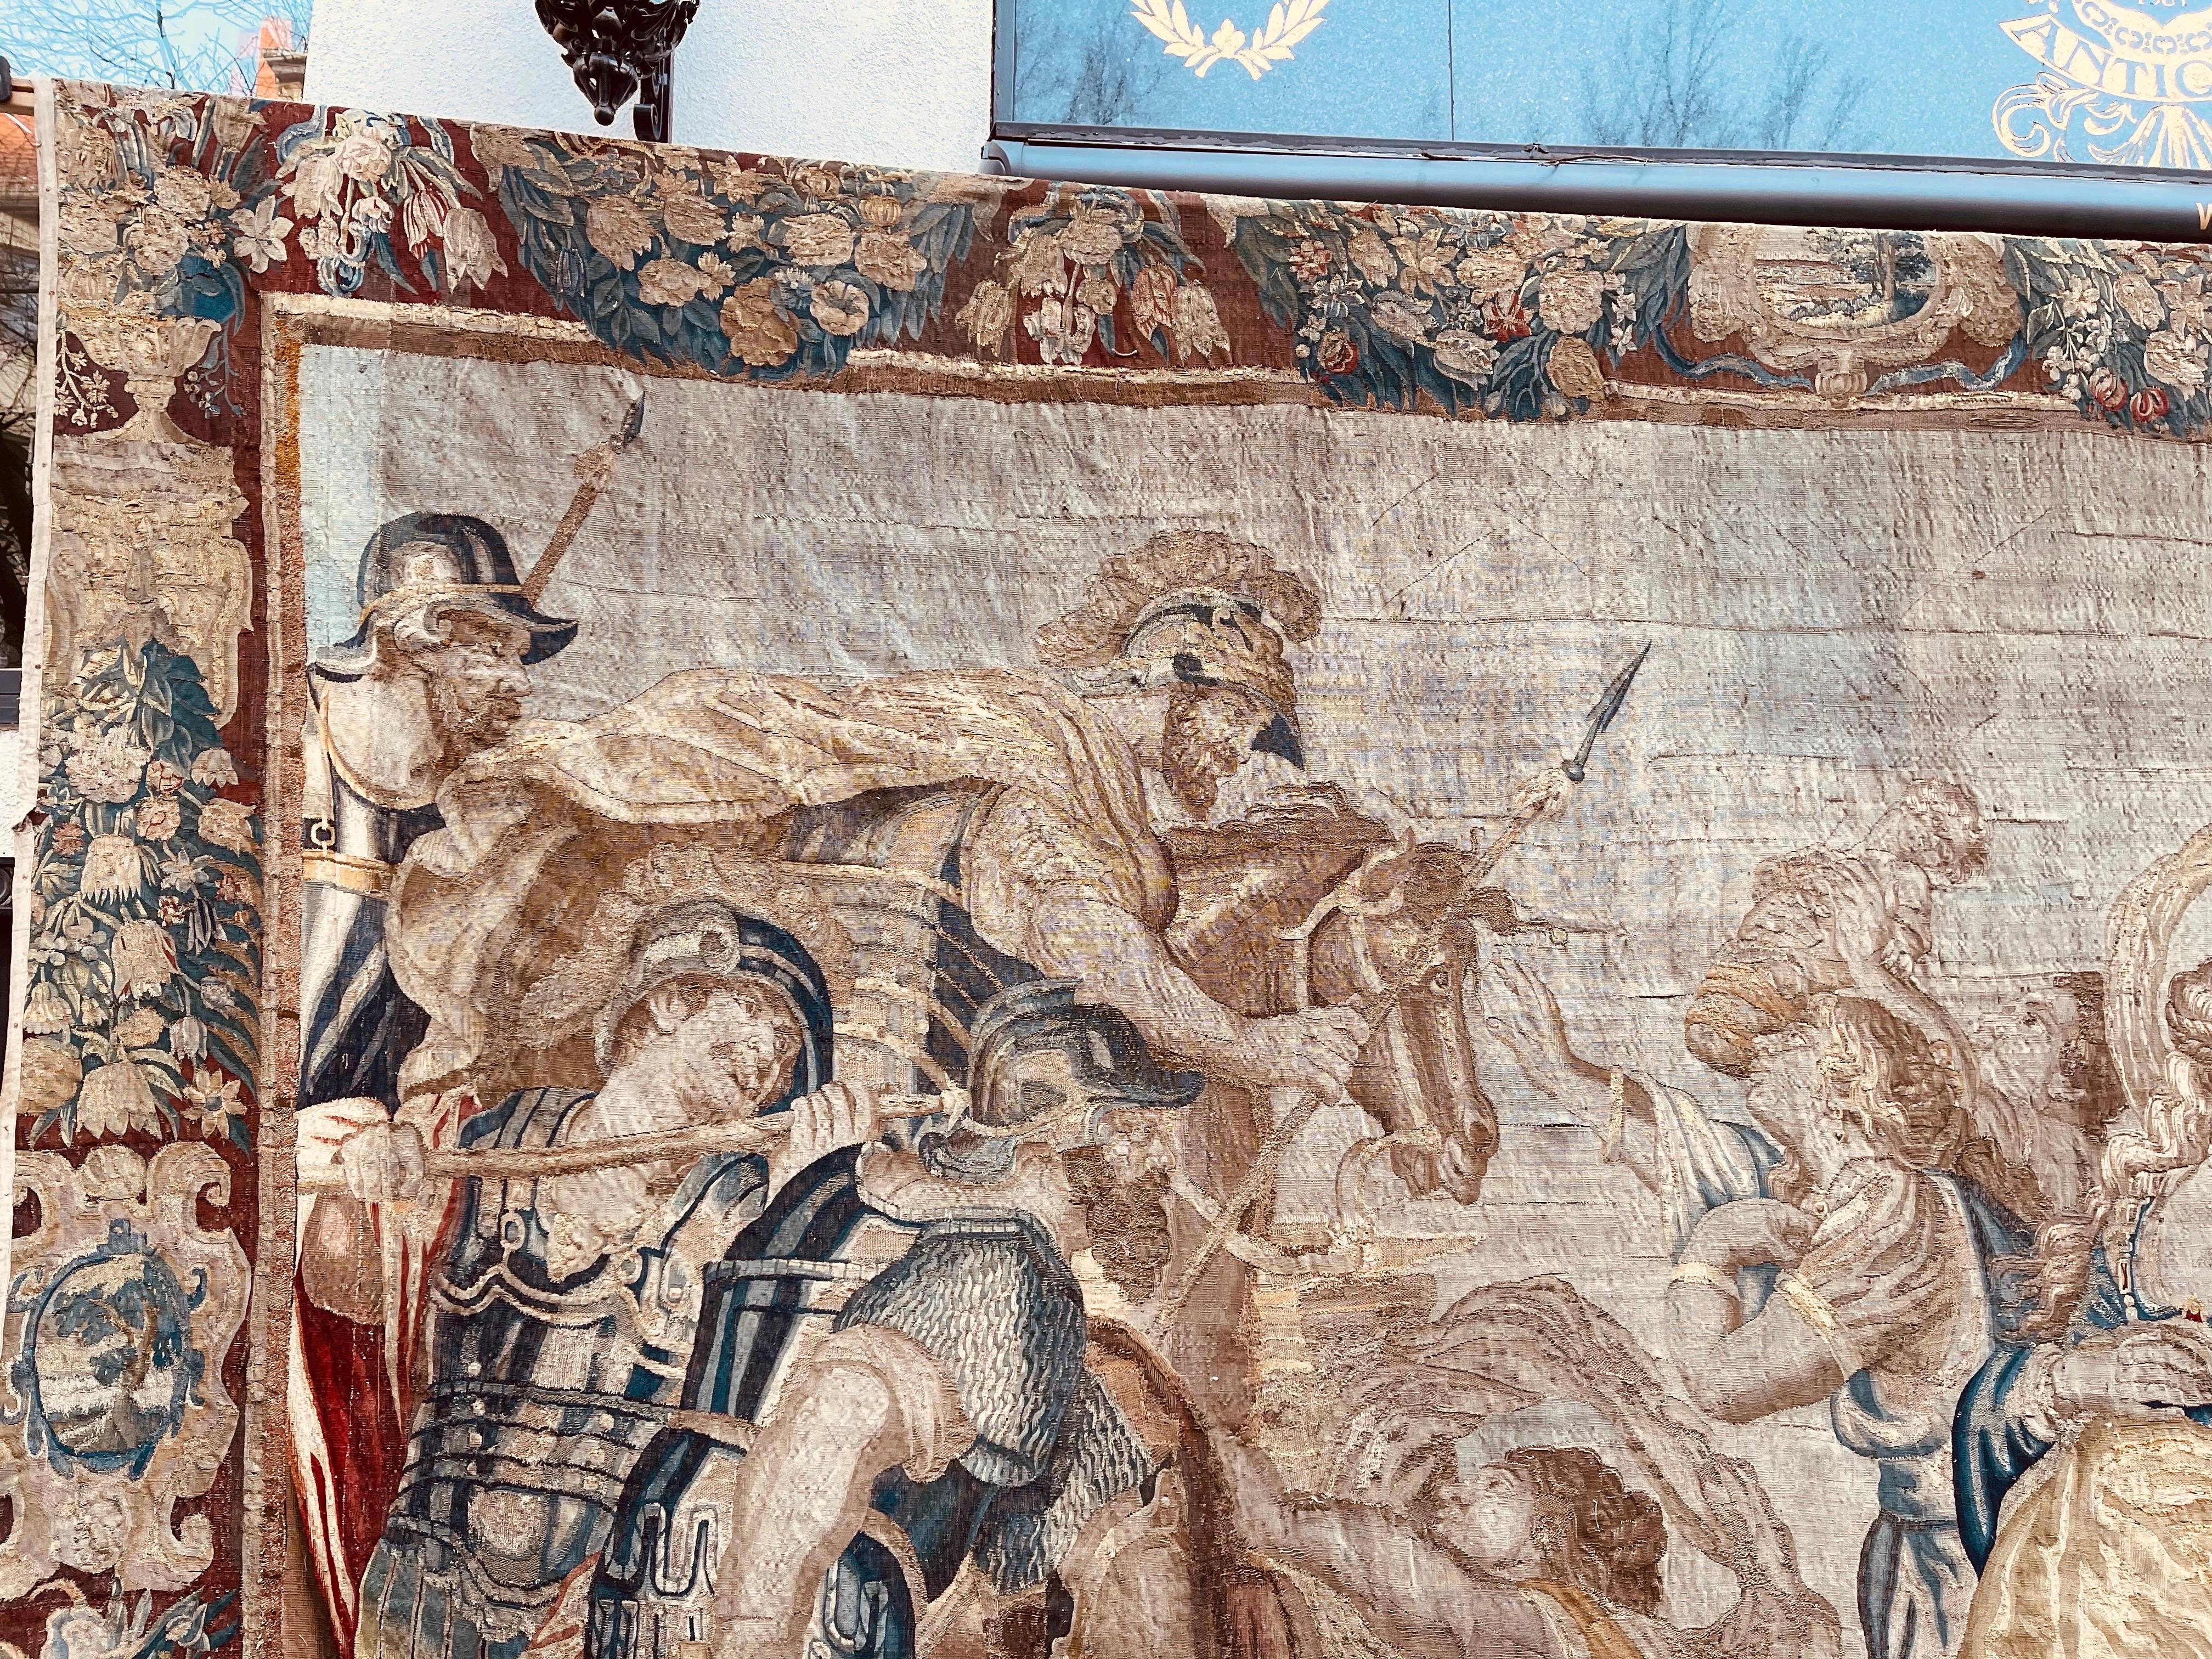 Hand-Woven 17th Century Tapestry/Gobelein Alexander The Great And Darius III Persian King For Sale